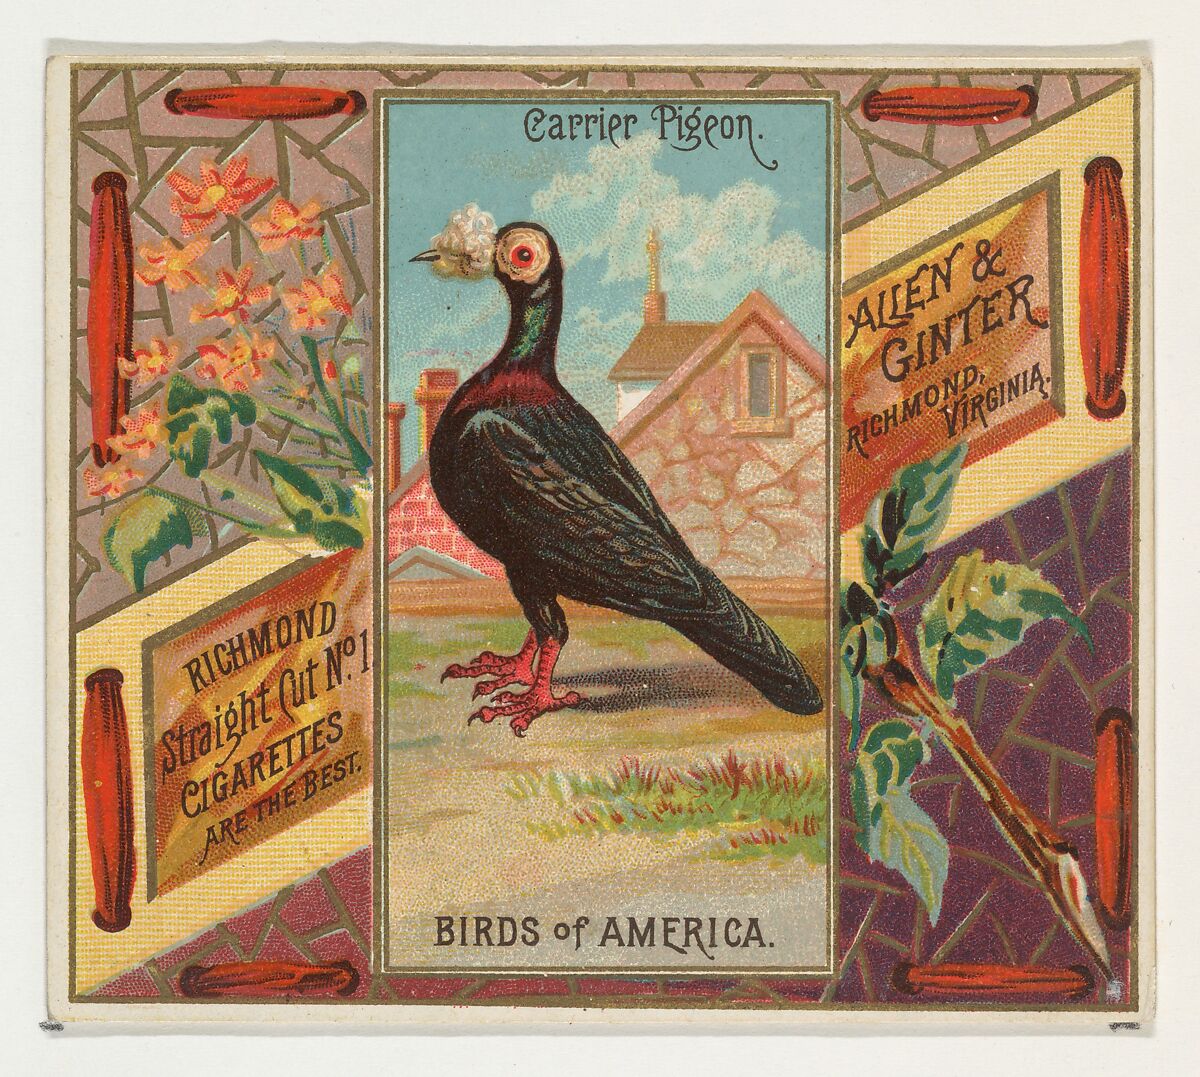 Carrier Pigeon, from the Birds of America series (N37) for Allen & Ginter Cigarettes, Issued by Allen &amp; Ginter (American, Richmond, Virginia), Commercial color lithograph 